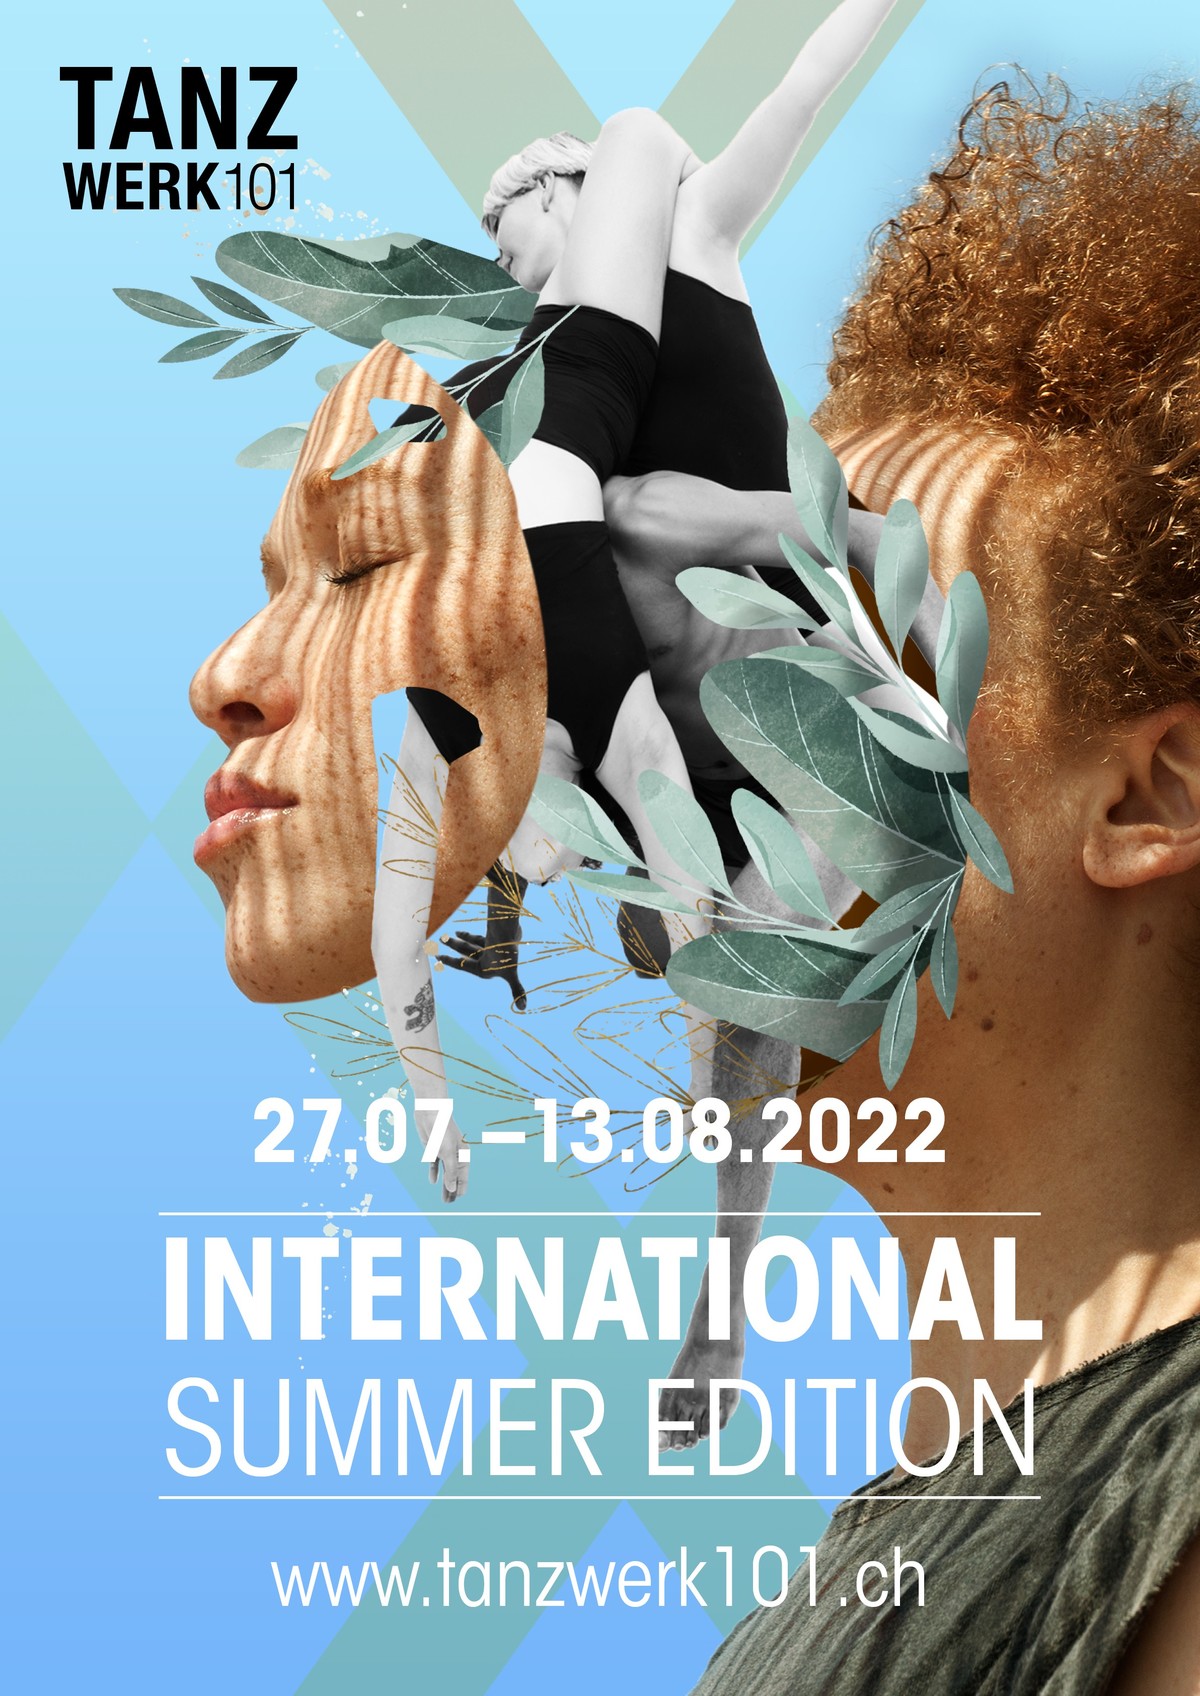 INTERNATIONAL SUMMER EDITION save the date